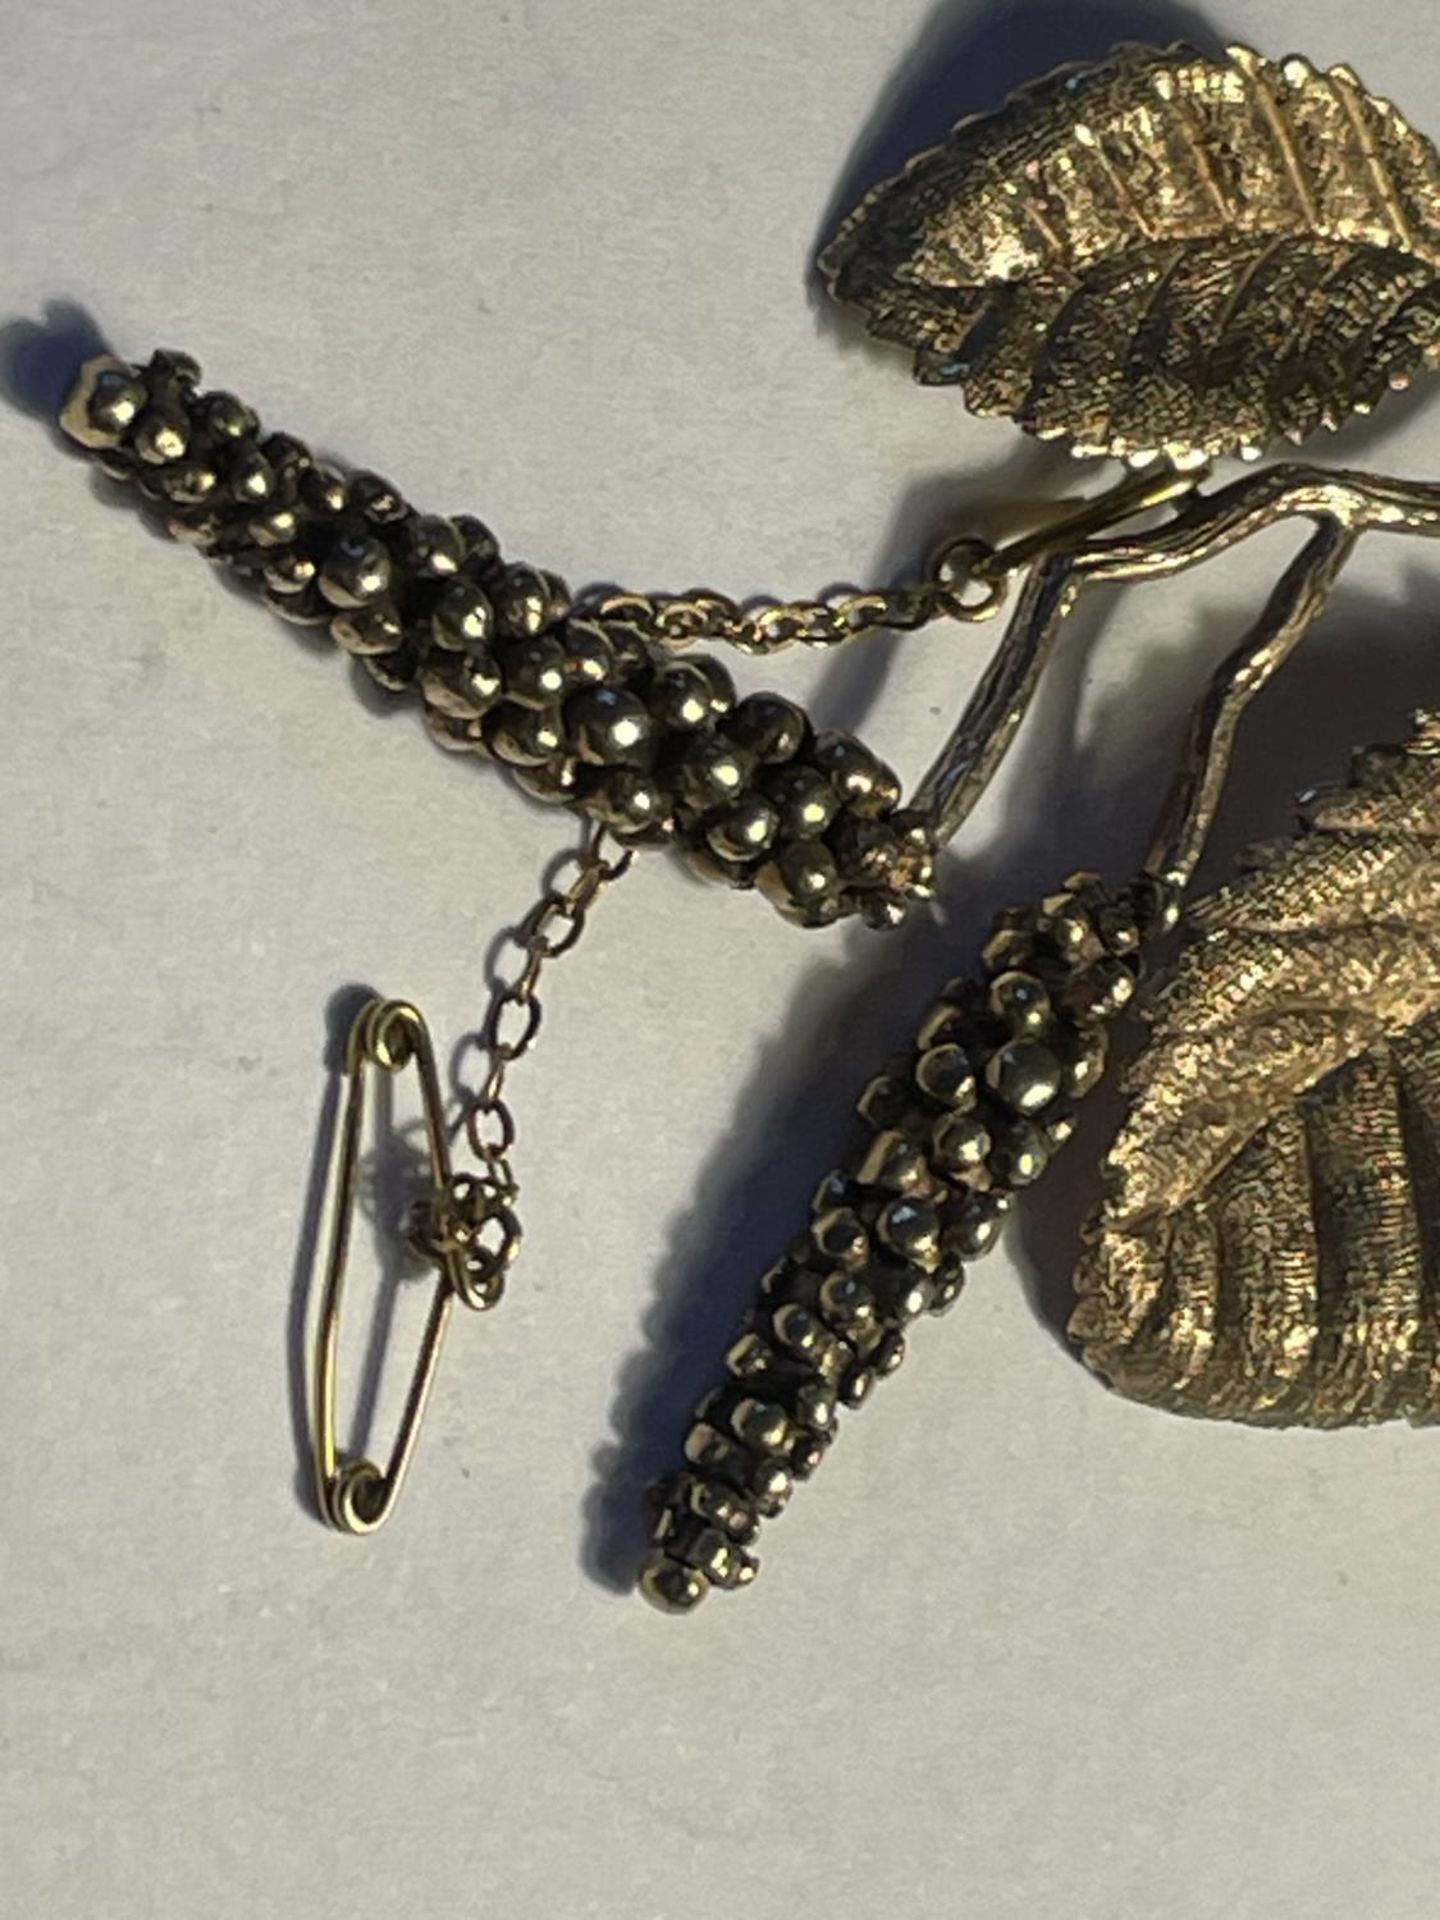 A VINTAGE HALLMARKED 9CT GOLD LEAF DESIGN BROOCH WITH GOLD PIN AND SAFETY CHAIN WEIGHT 12.55 GRAMS - Image 2 of 4